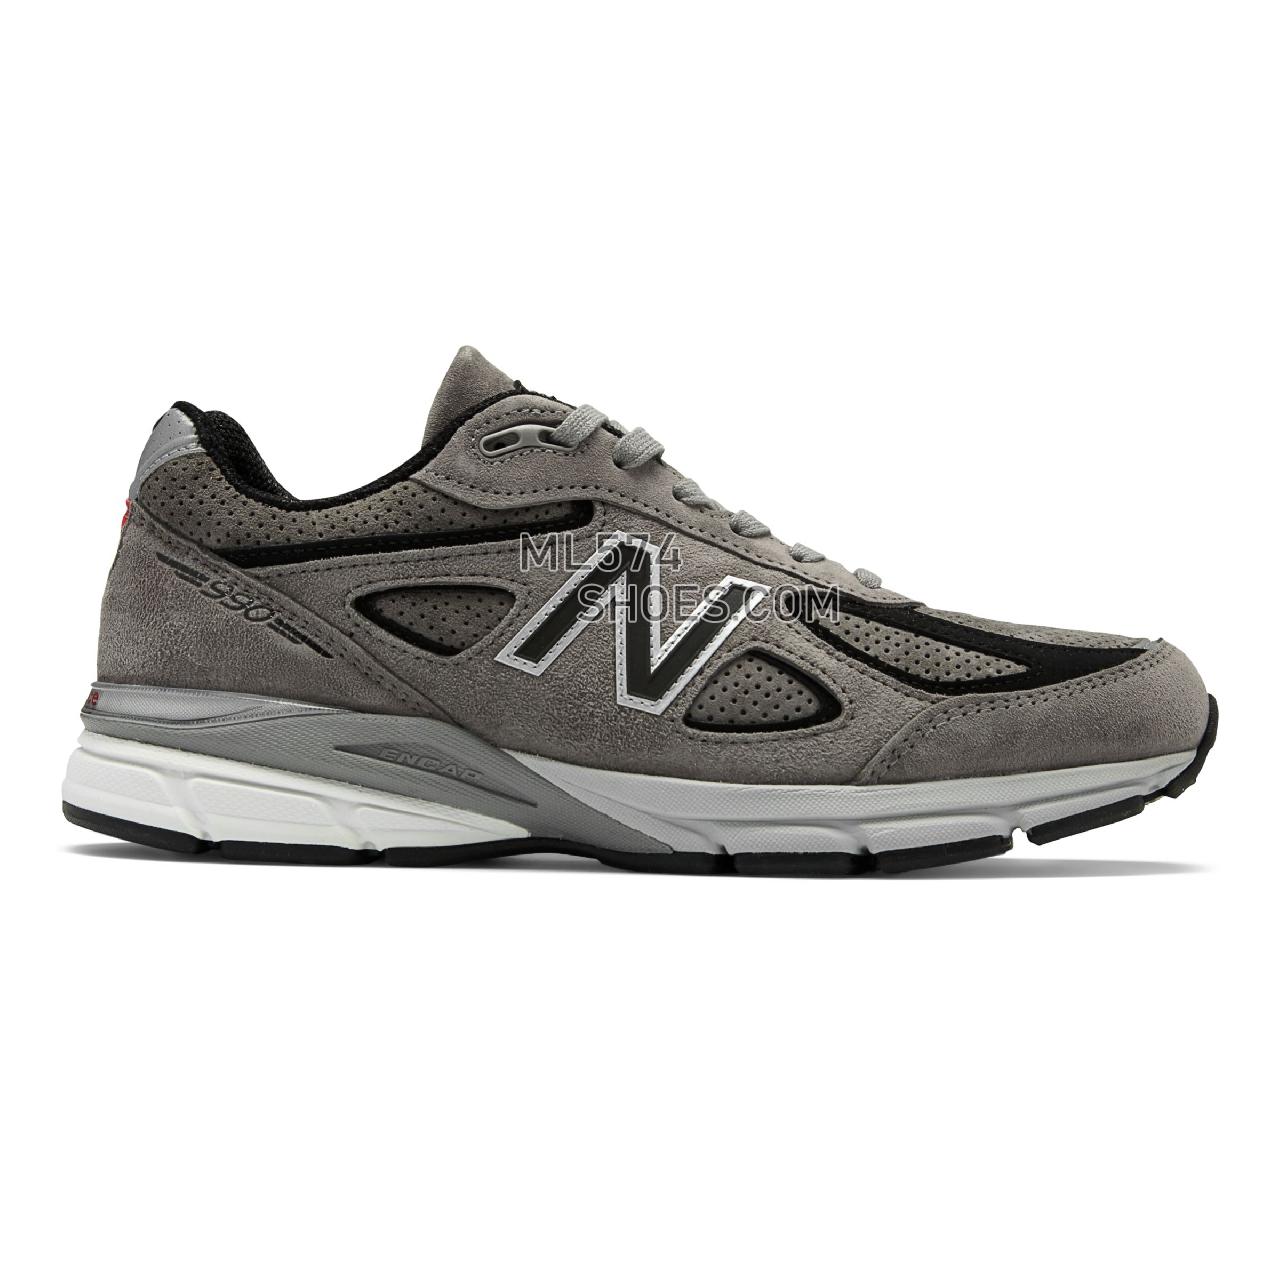 New Balance Mens 990v4 Made in US - Men's 990 - Running Marblehead with Black - M990SG4